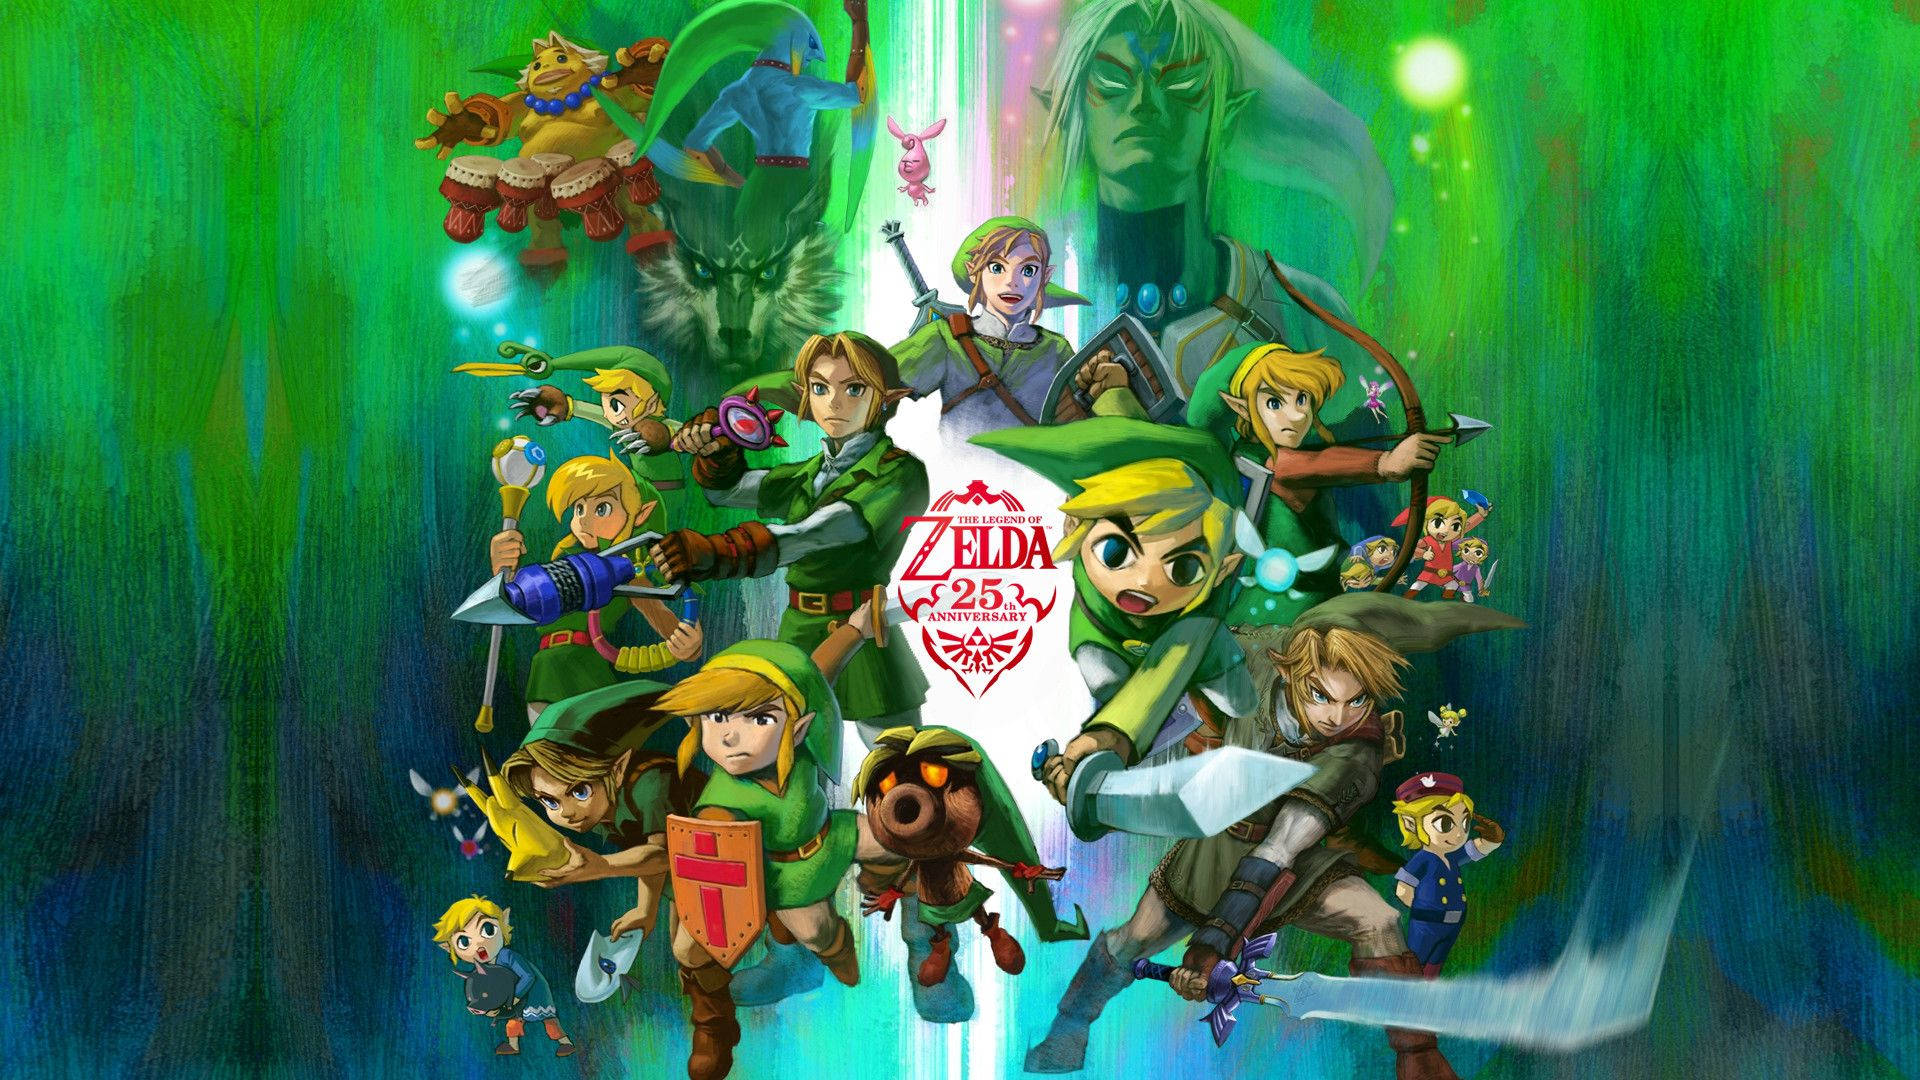 Travel the world of Hyrule on an epic adventure with Link and Zelda. Wallpaper